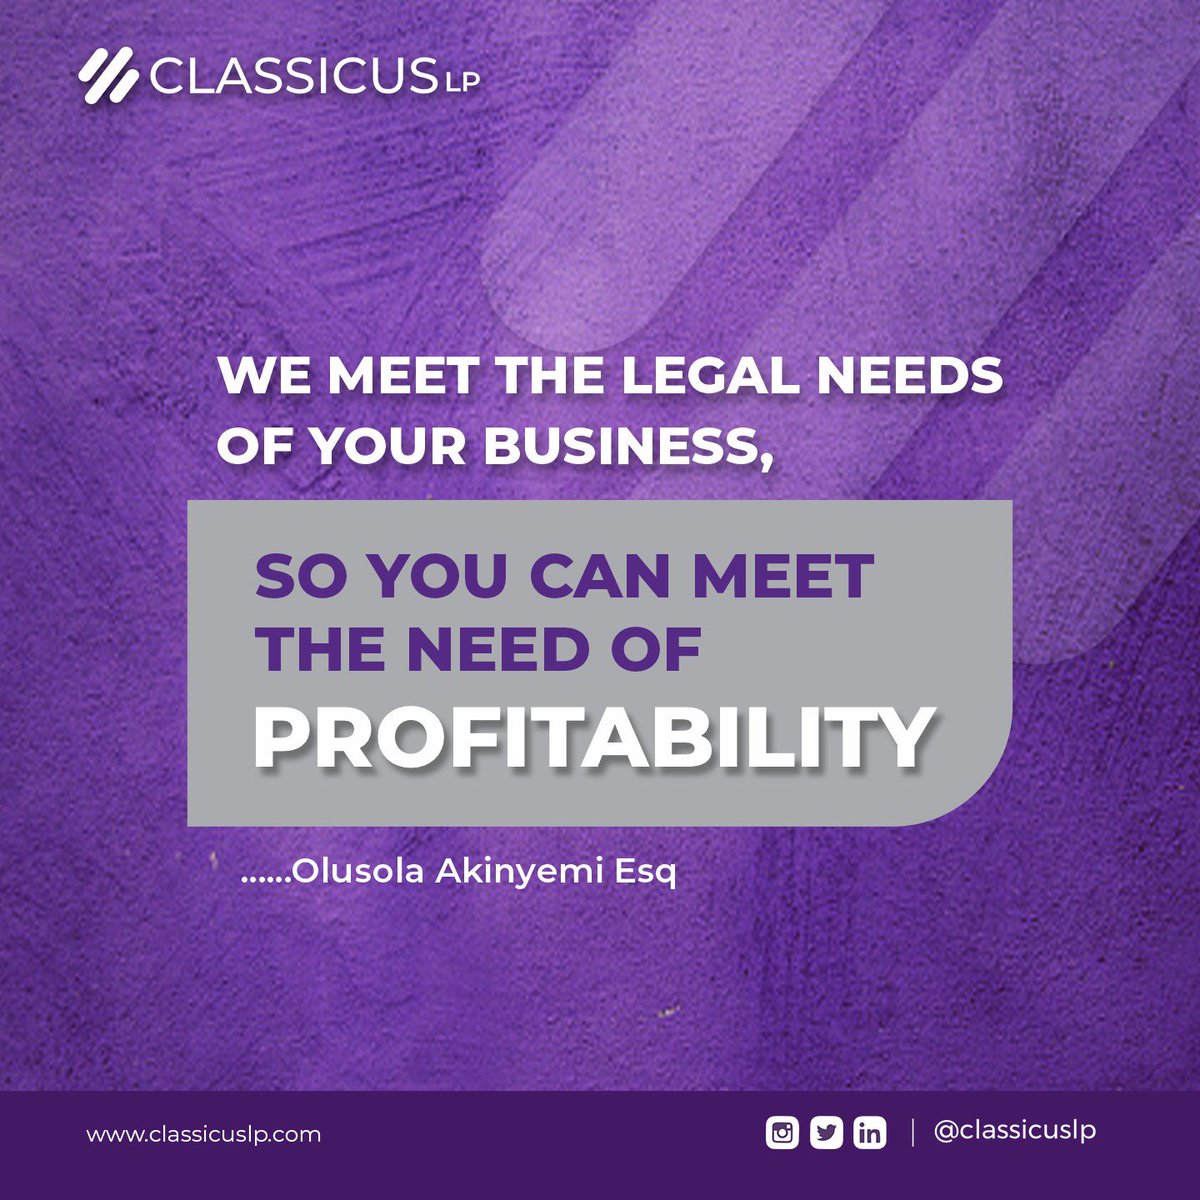 Meeting your legal needs, is one of our top priorities.                                                                                               #lawfirm #legaltips #advocate #businesslaw #estatelawyer #solicitor #lagoslawyers #enterpreneur #business #estatemanagement